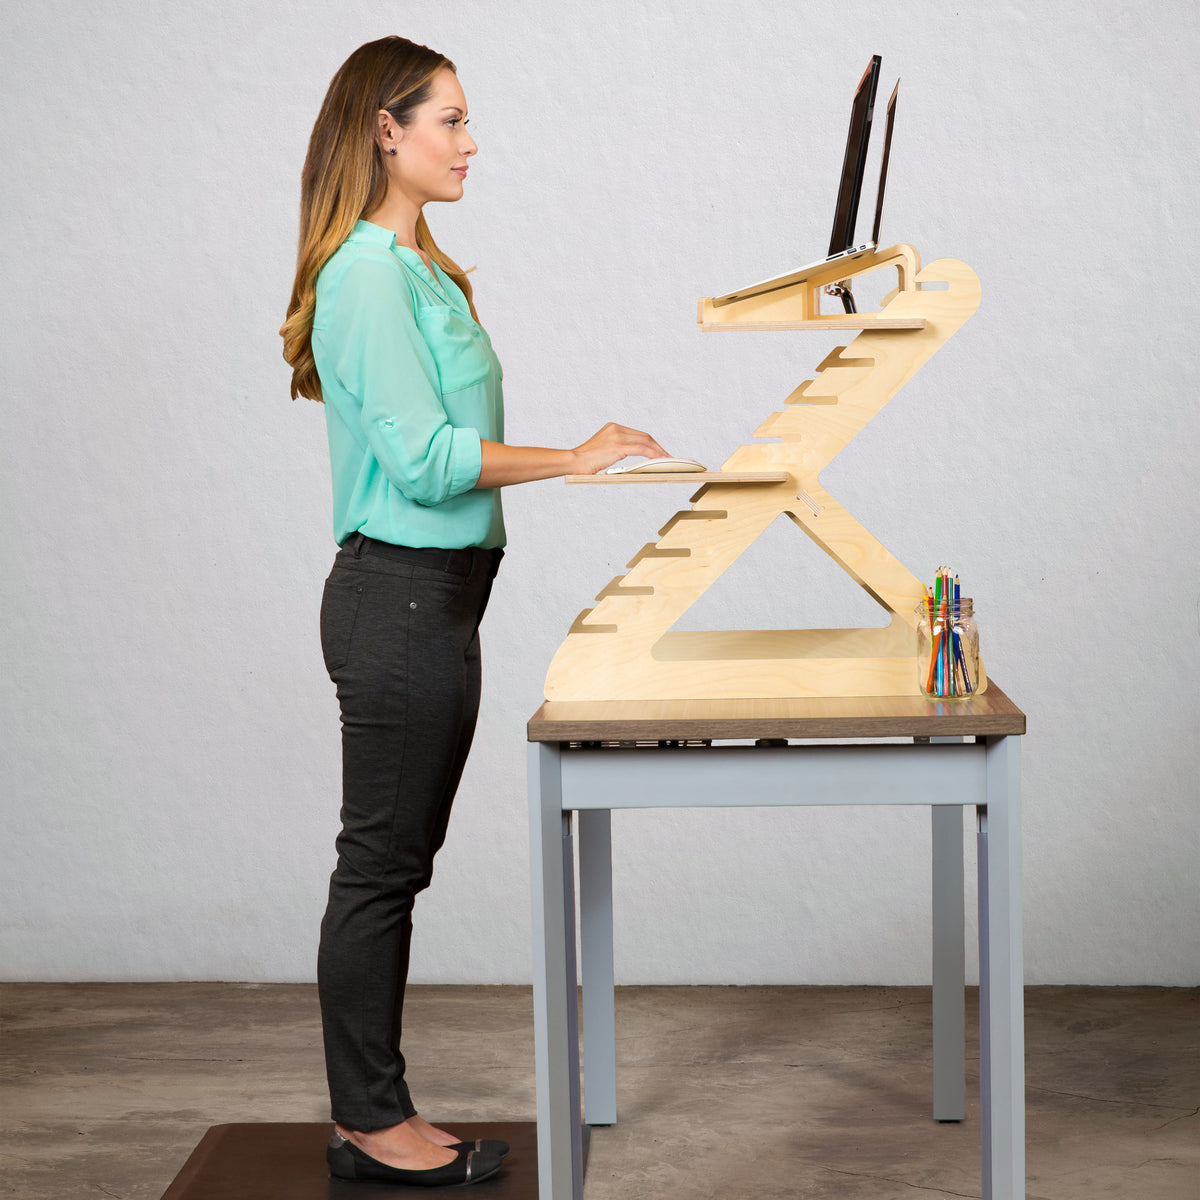 Top Standing Desk Converters And Laptop Stands Readydesk